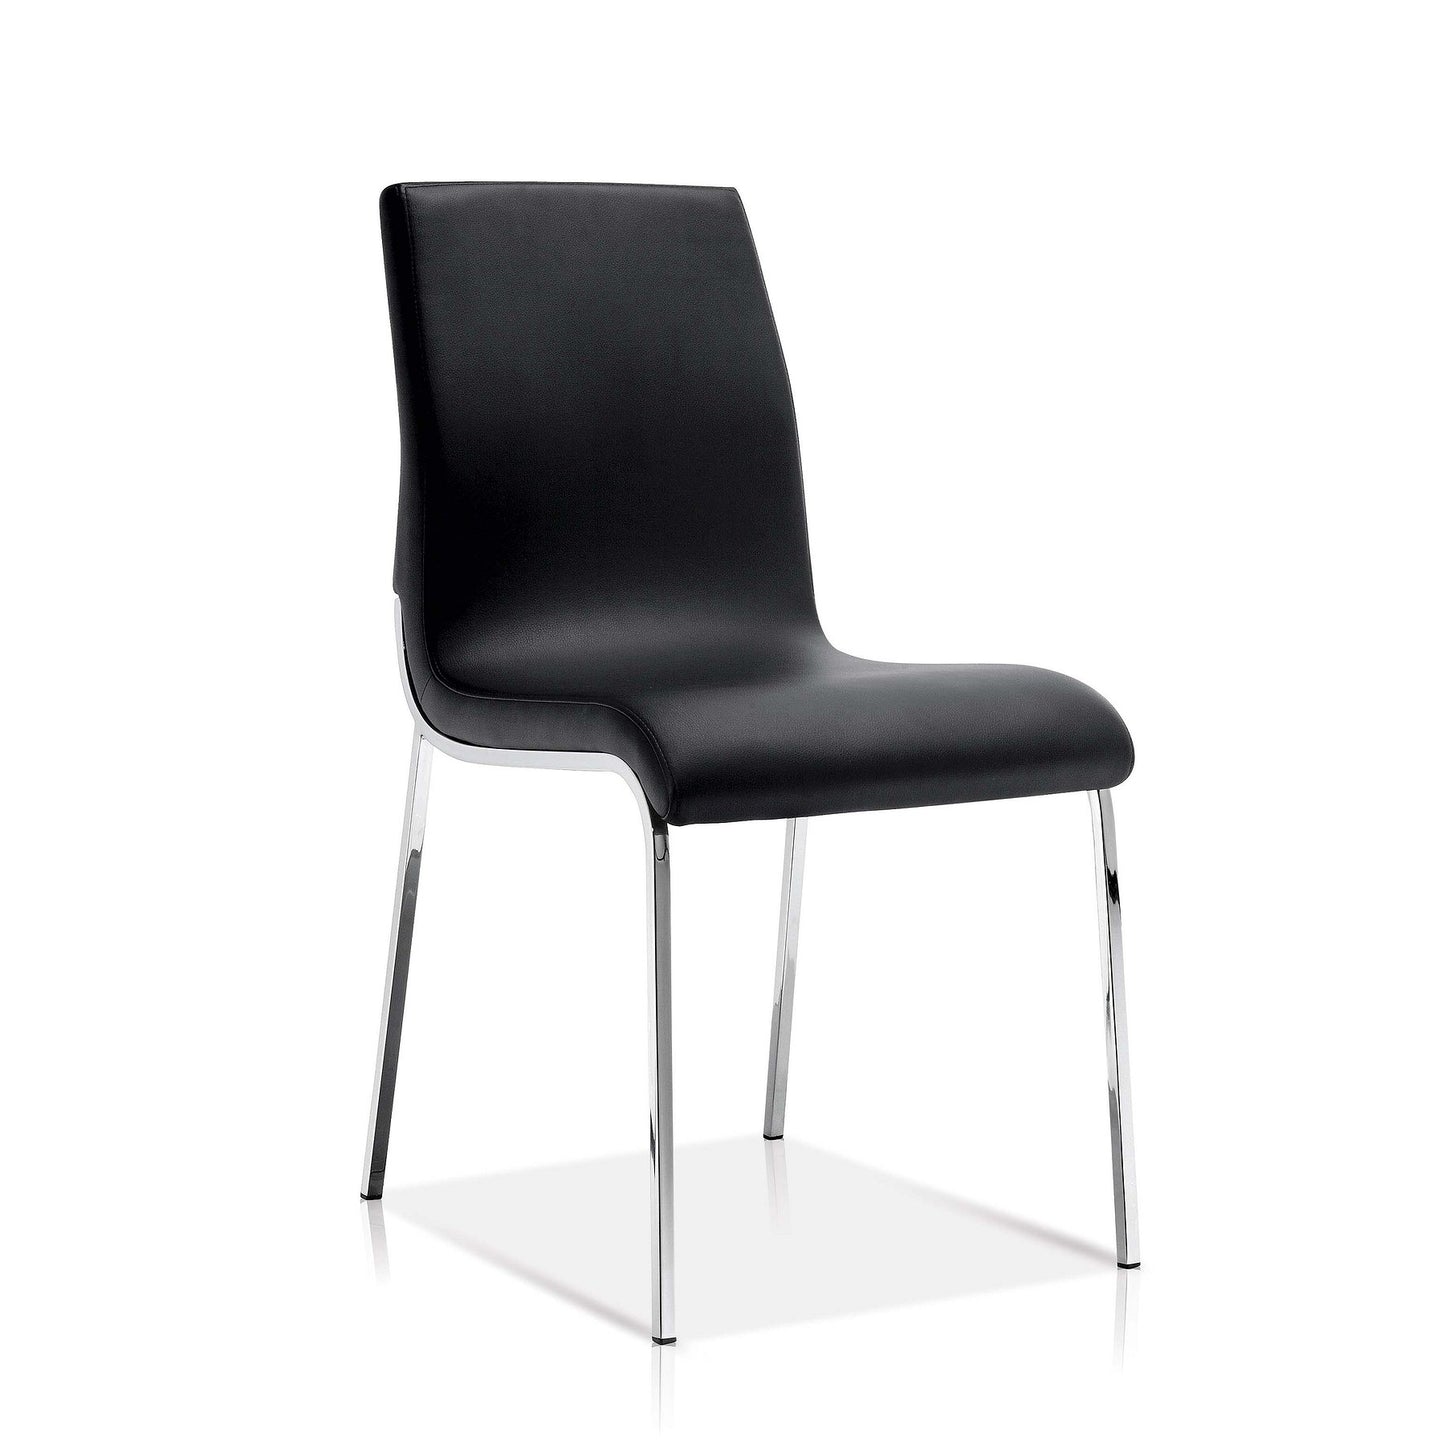 SEF314174 max - dining chair - Dreamart Gallery